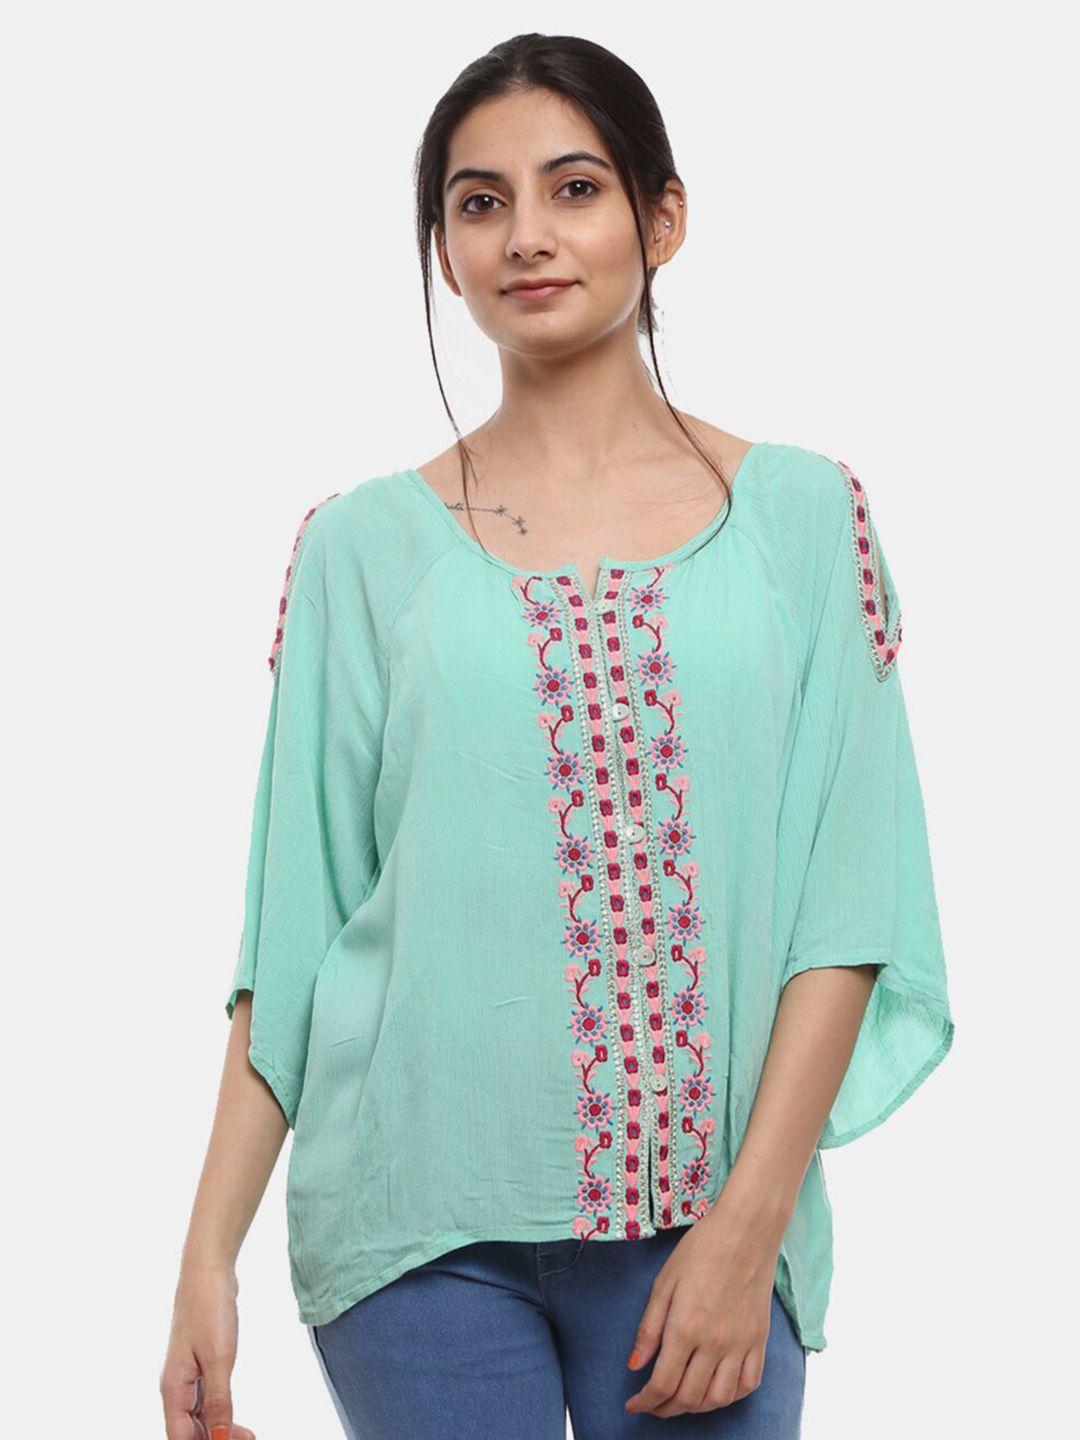 v-mart sea green floral embroidered chiffon top